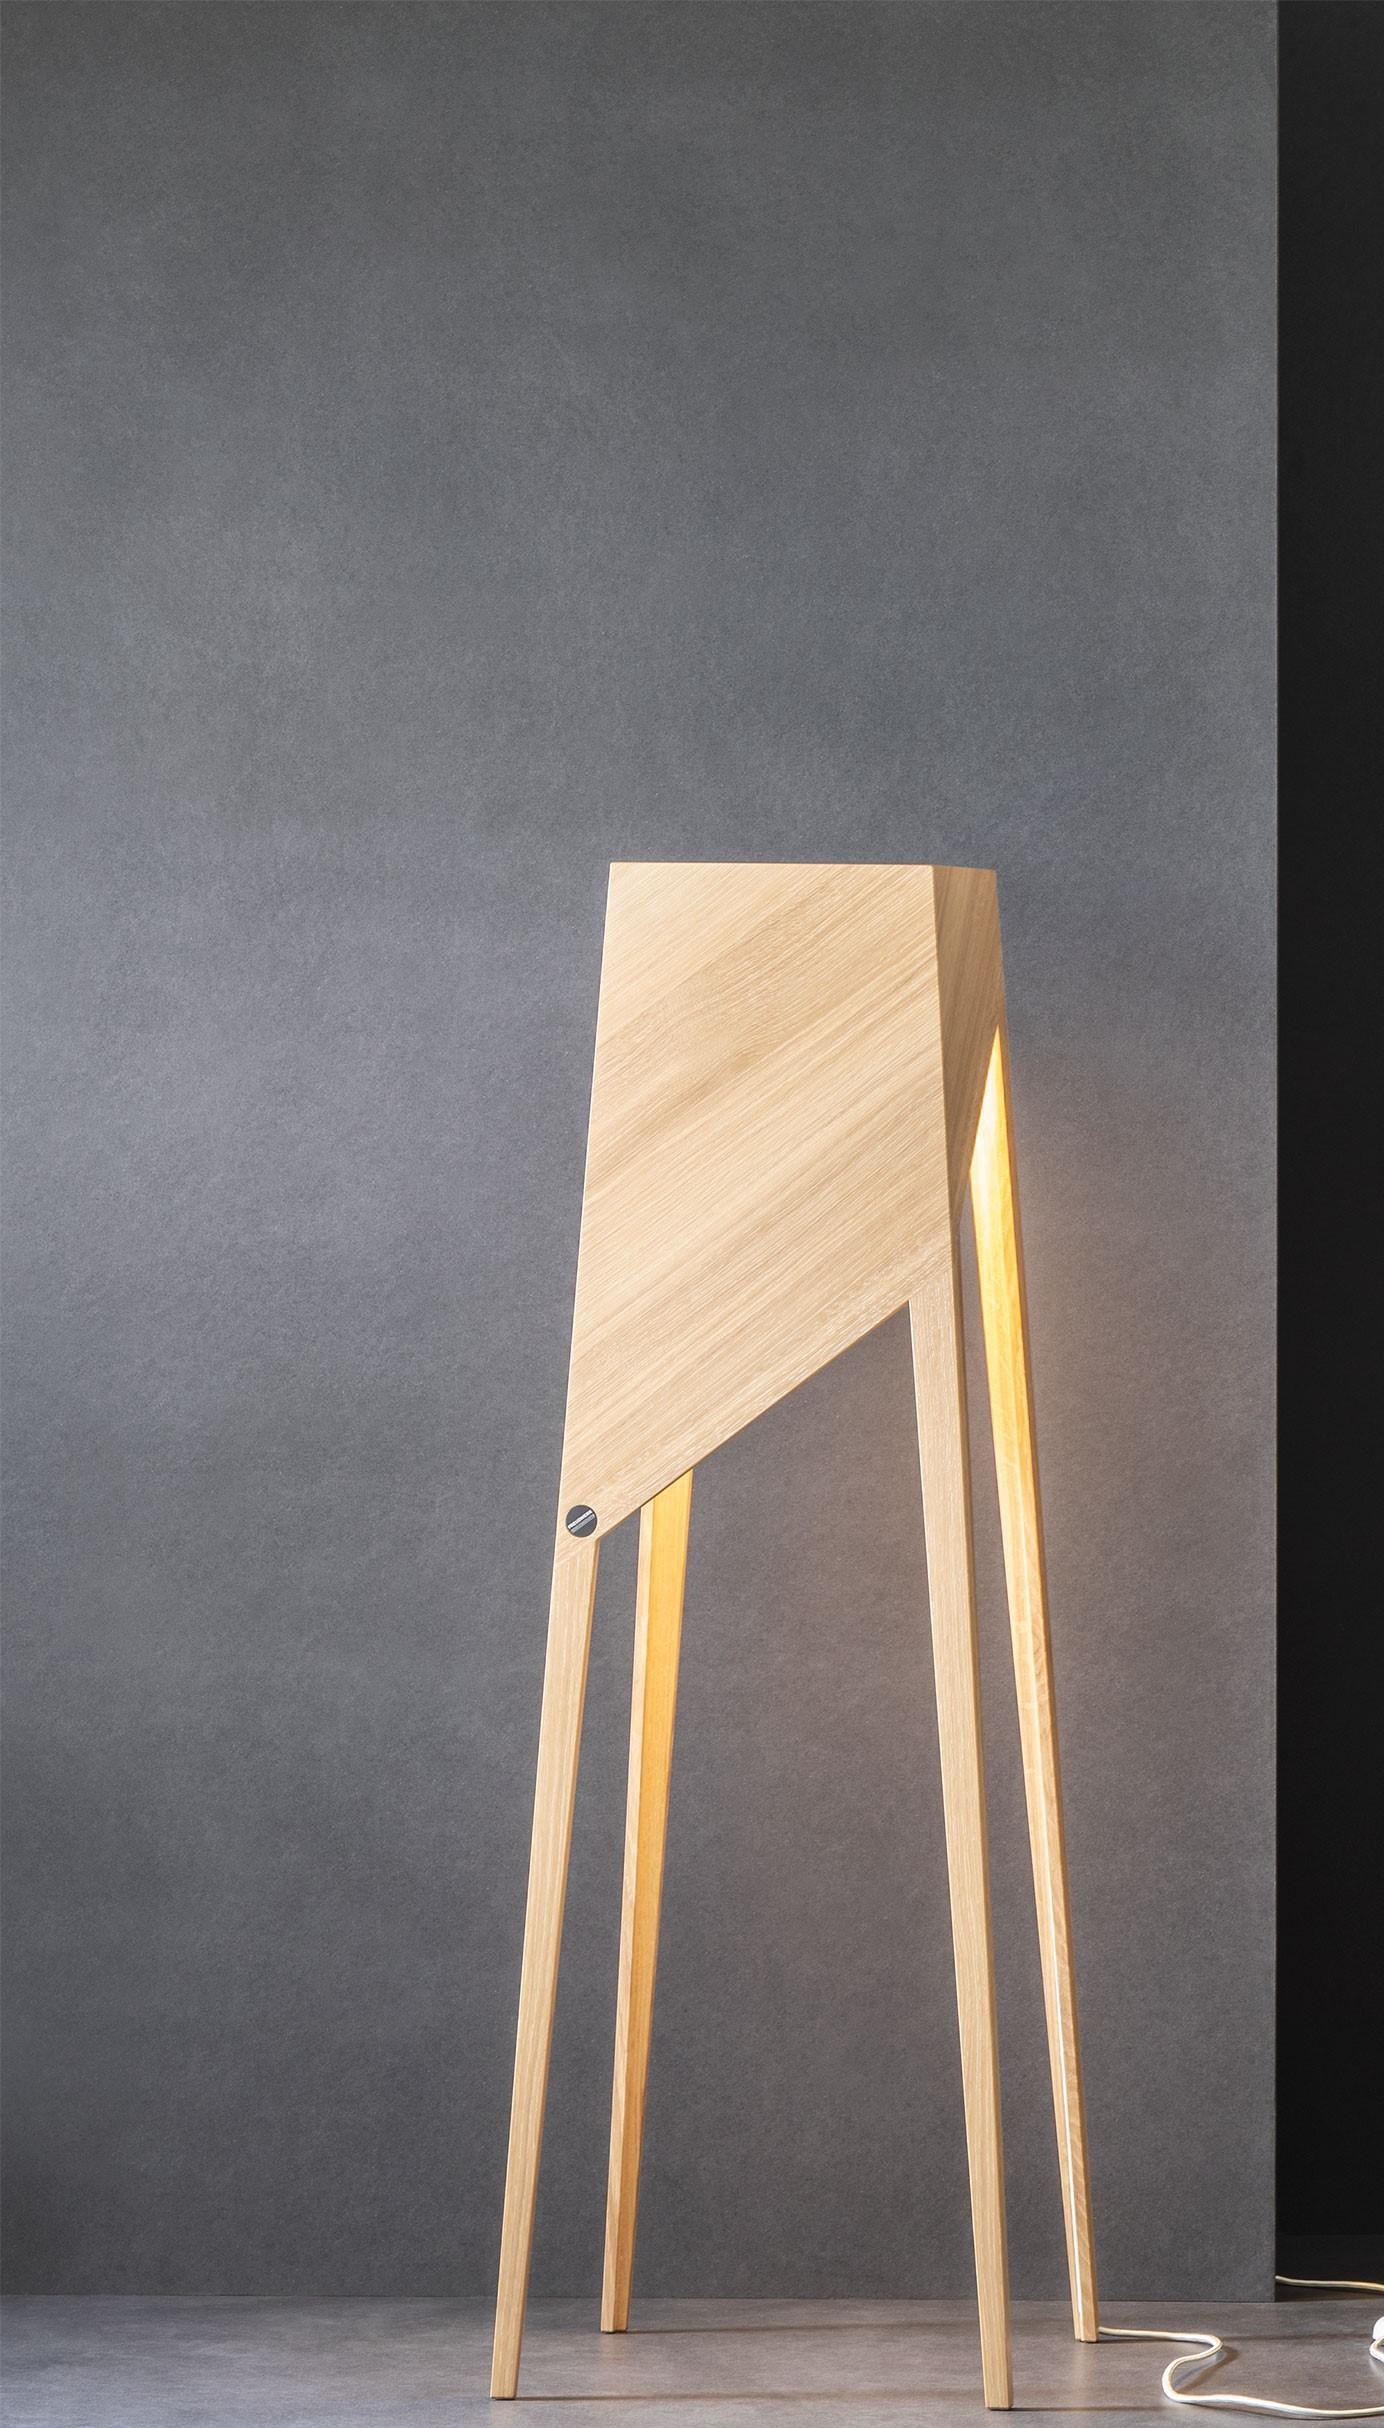 Luise floor lamp by Matthias Scherzinger
Dimensions: H 140 x 48 cm
Materials: oak: white lyed, oil

All our lamps can be wired according to each country. If sold to the USA it will be wired for the USA for instance.

Large, medium and small